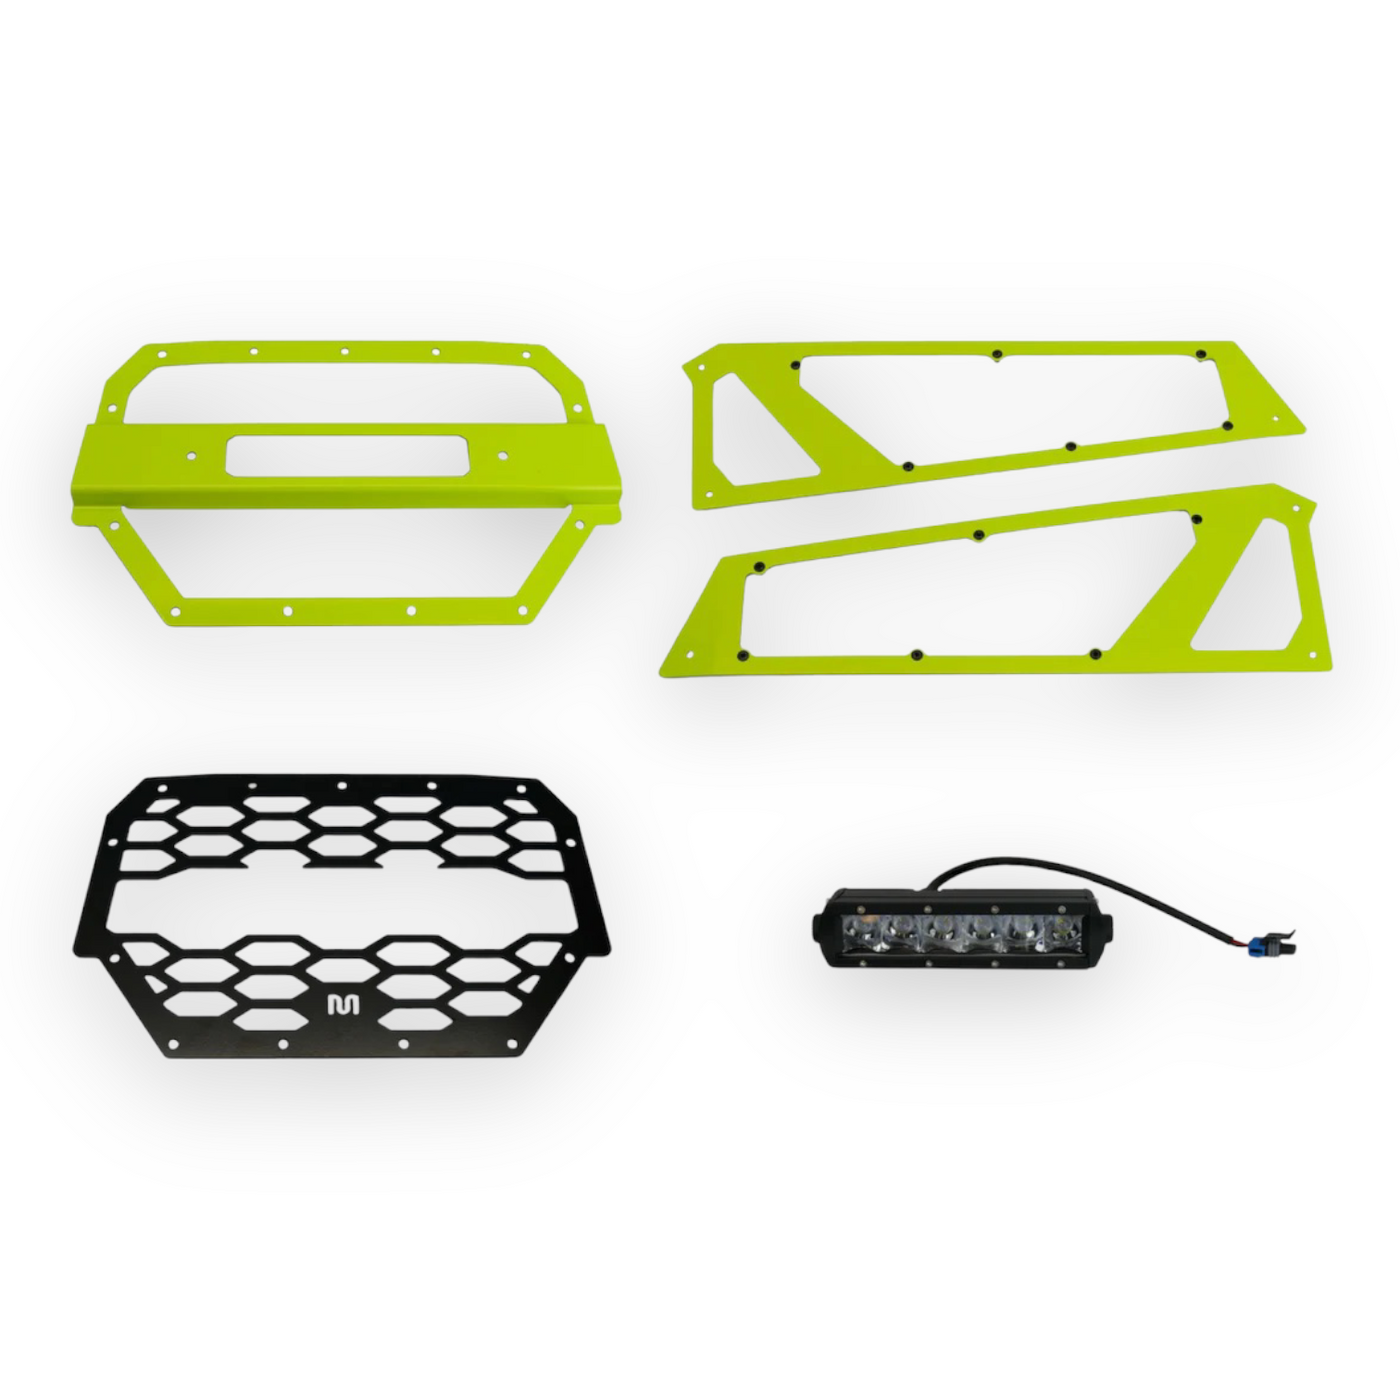 Front LED Grille and Headlight Protector Kit for Polaris RZR (2014-2018)